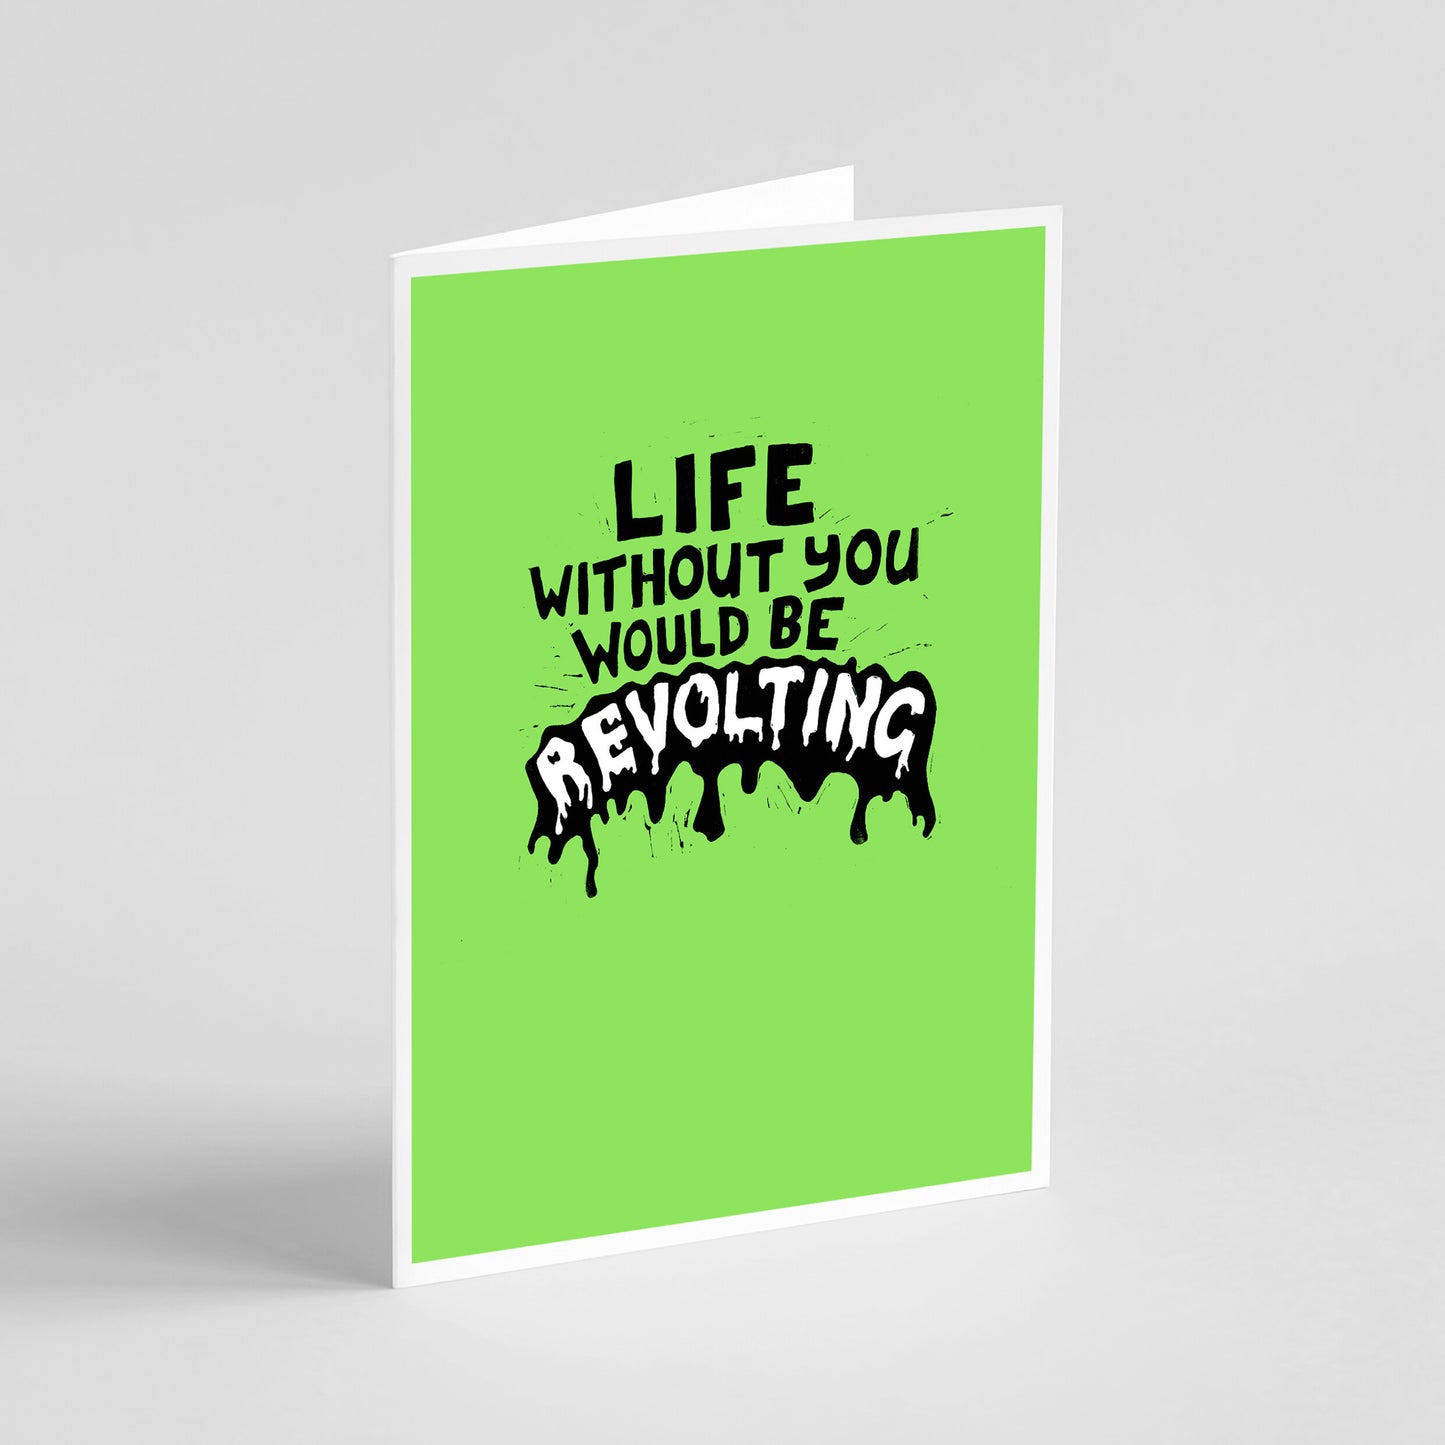 Life Without You Would Be Revolting - Card